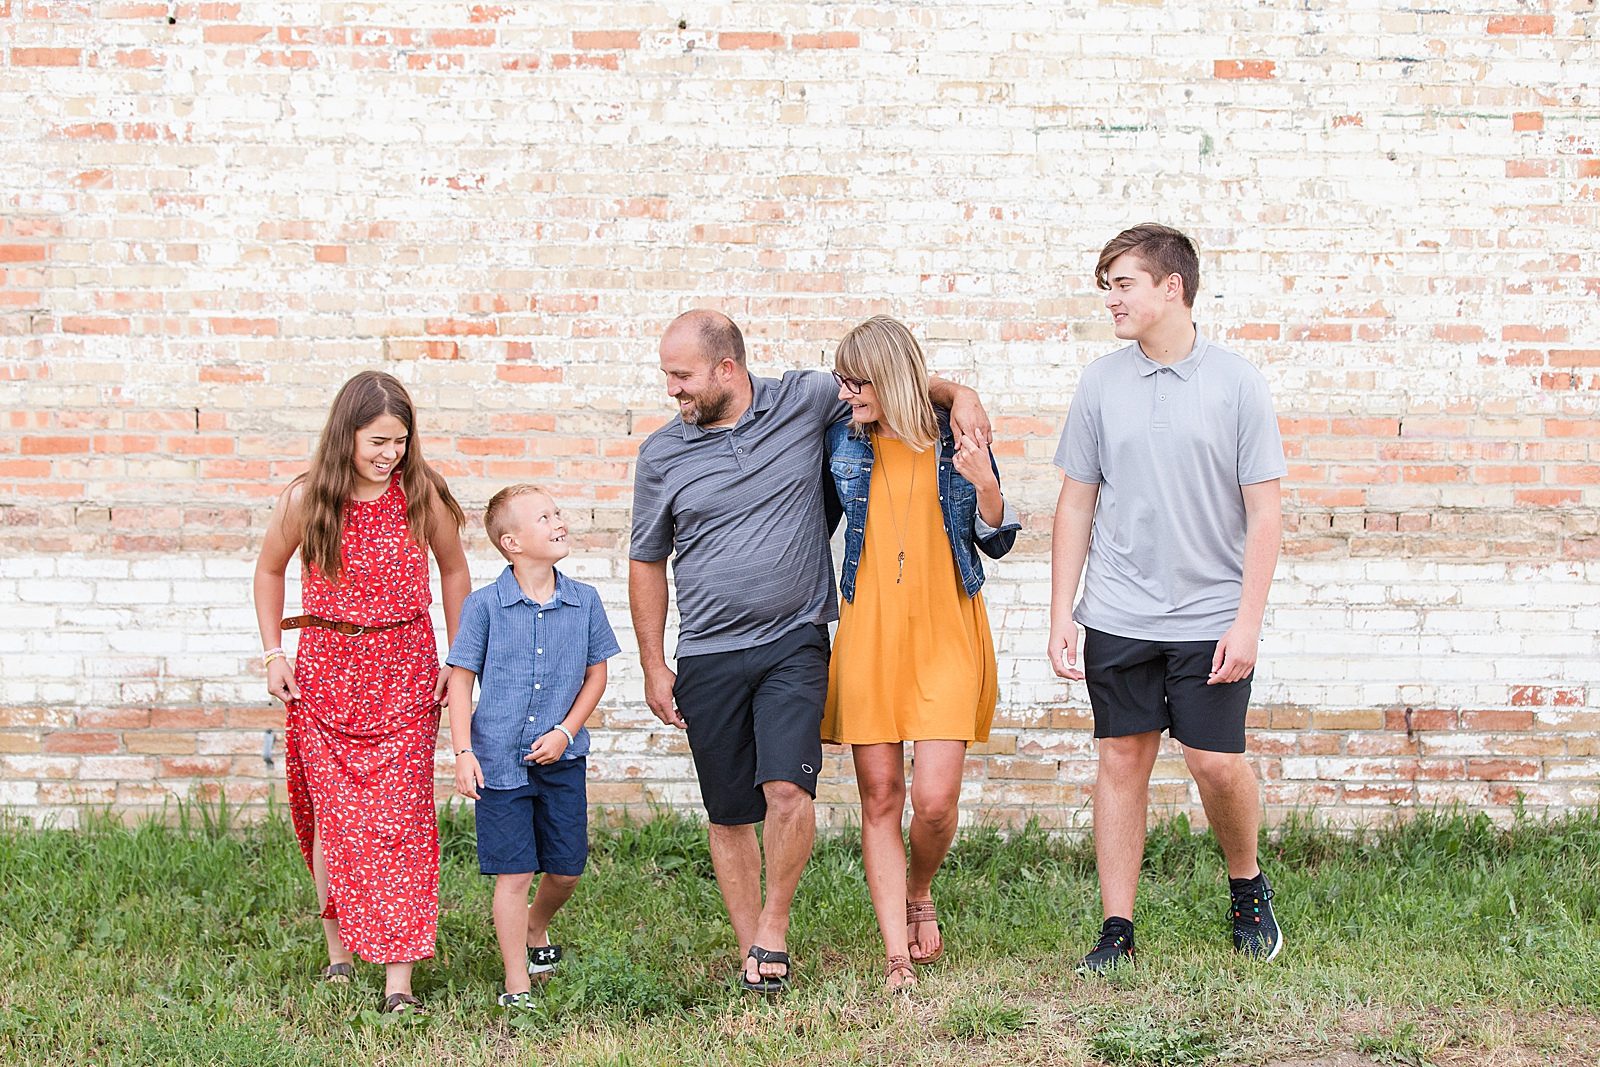 Krystal Moore Photography Moose Jaw Family photos in front of a brick wall